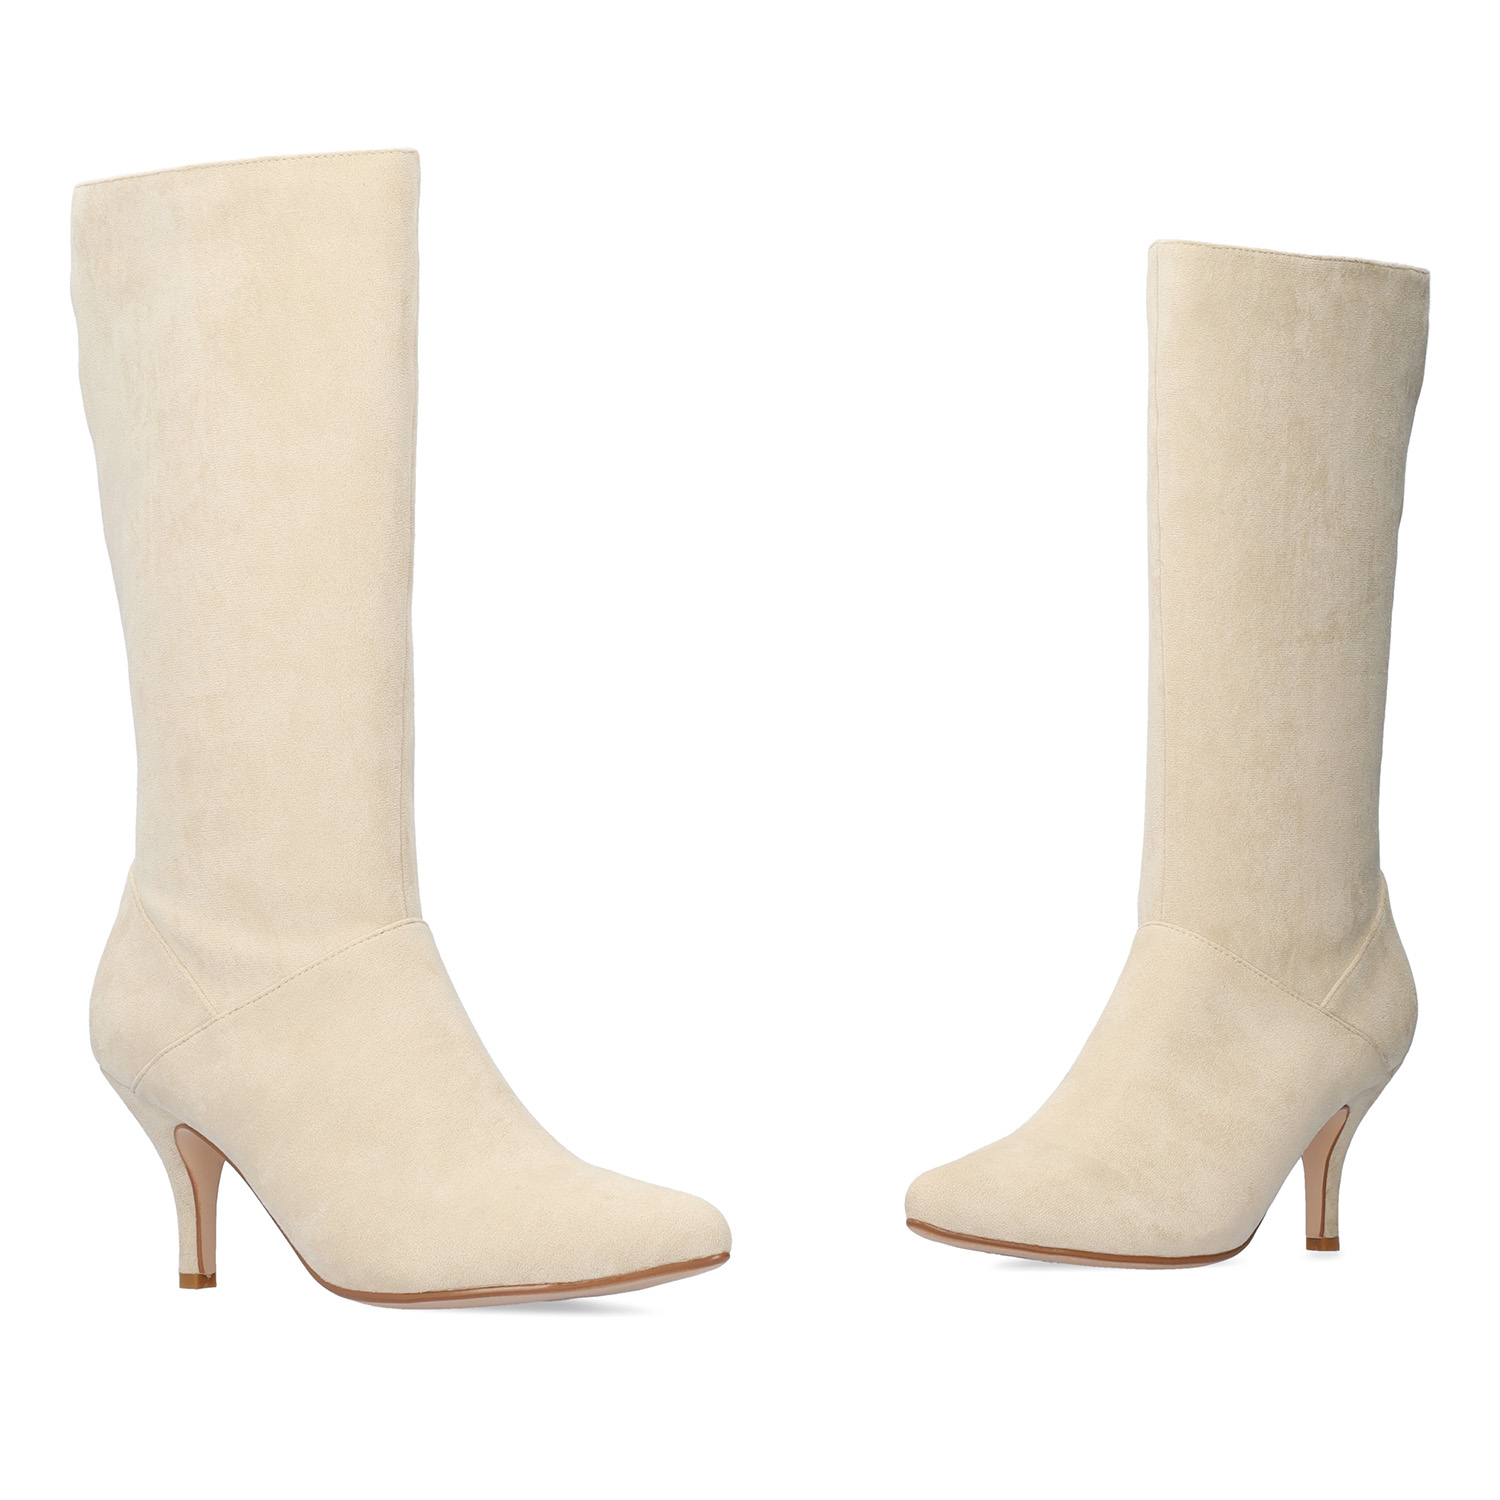 Heeled high boots in off white faux suede. 